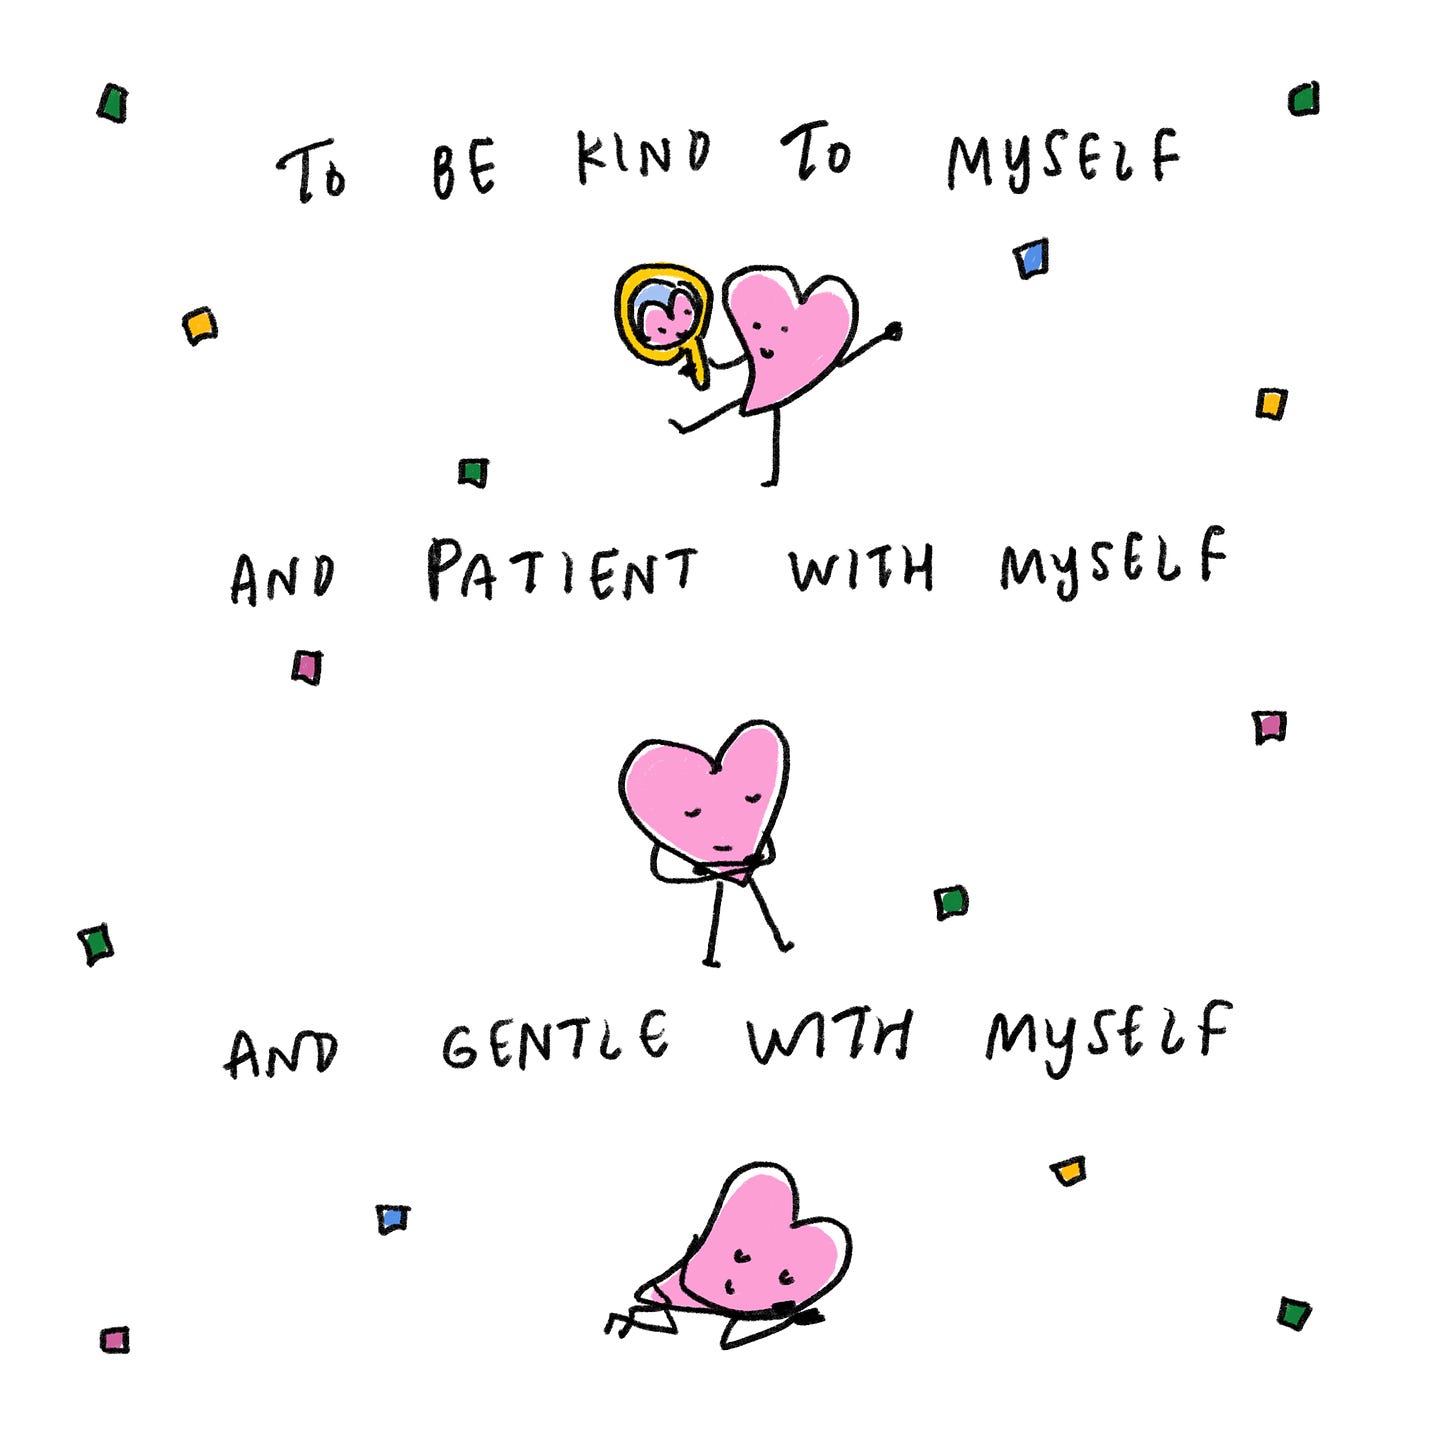 Being kind to myself Being gentle with myself Being patient with myself